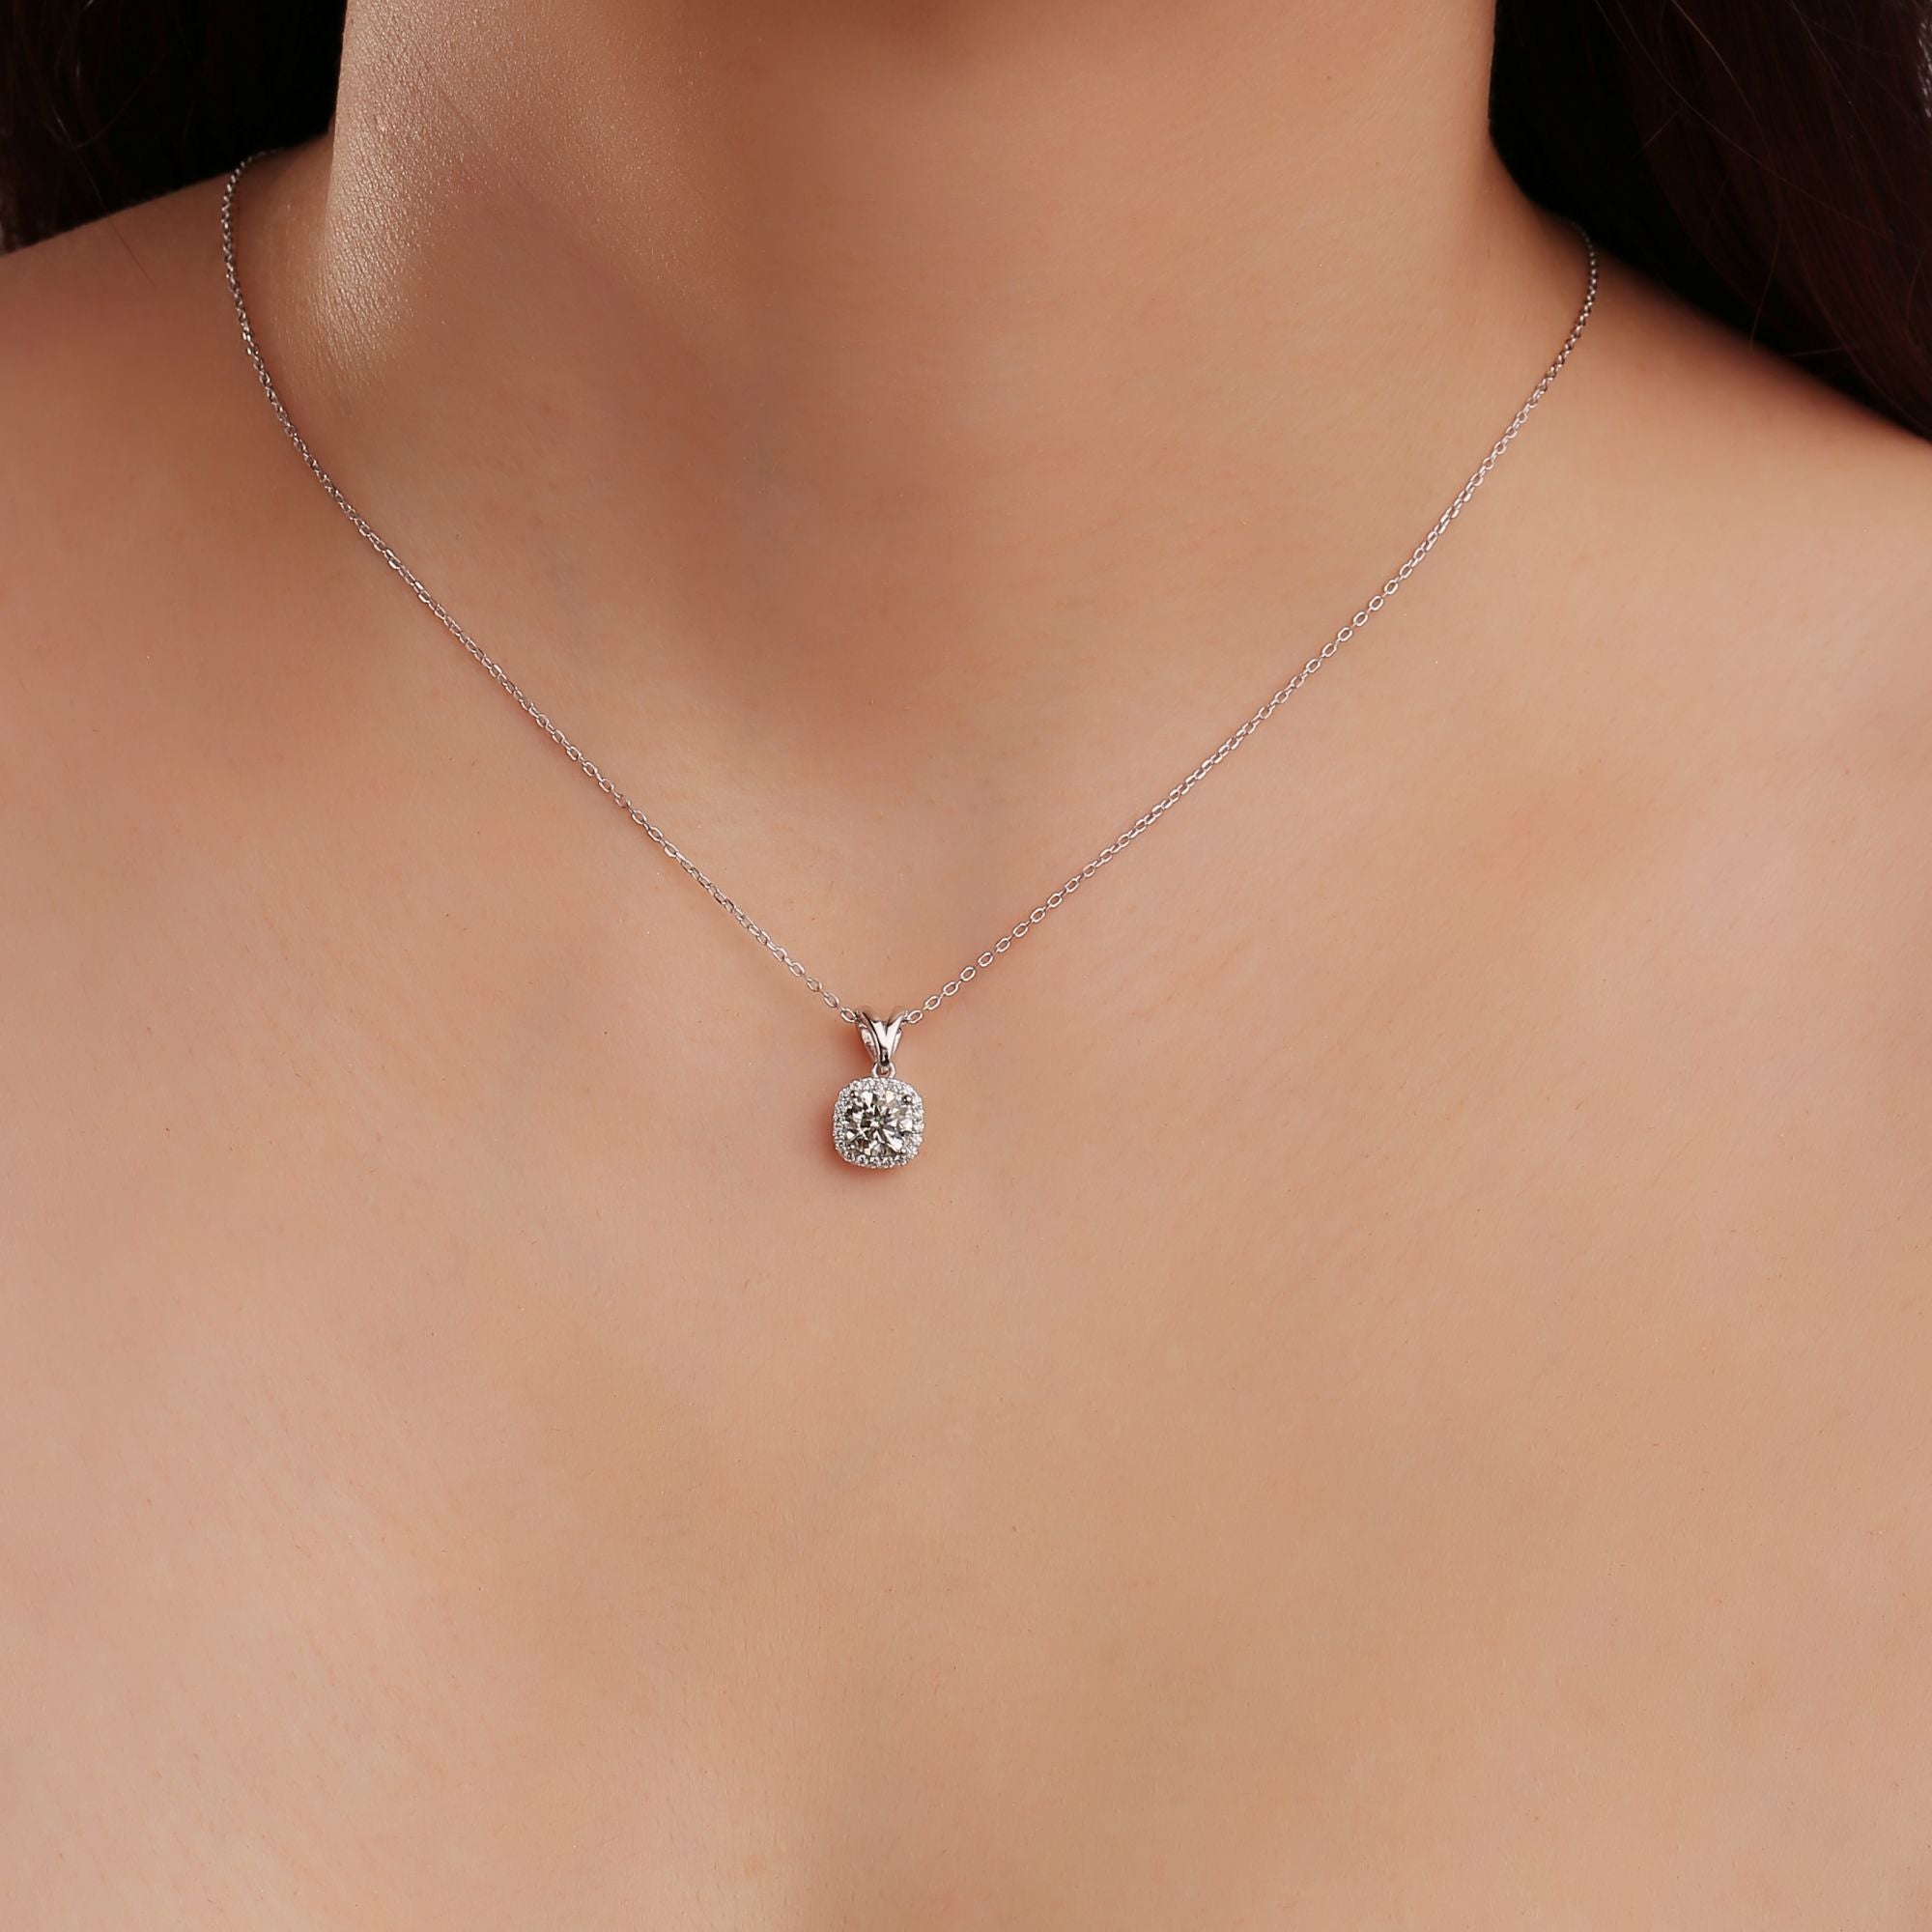 1 CT. Luxury Square  Moissanite Sterling Silver Necklace